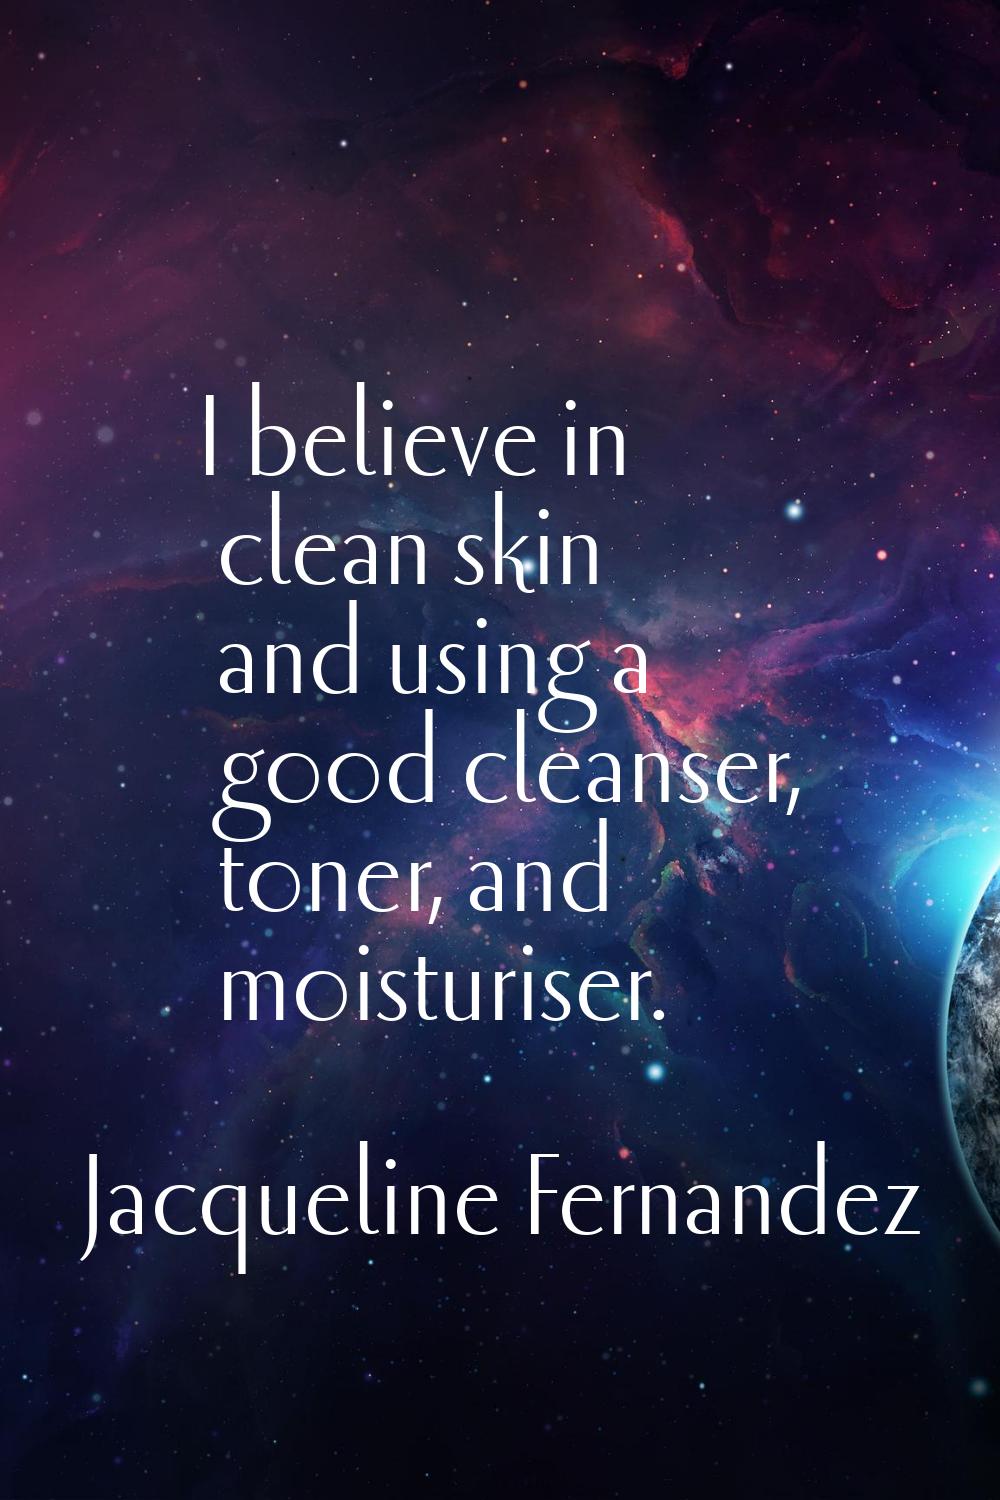 I believe in clean skin and using a good cleanser, toner, and moisturiser.